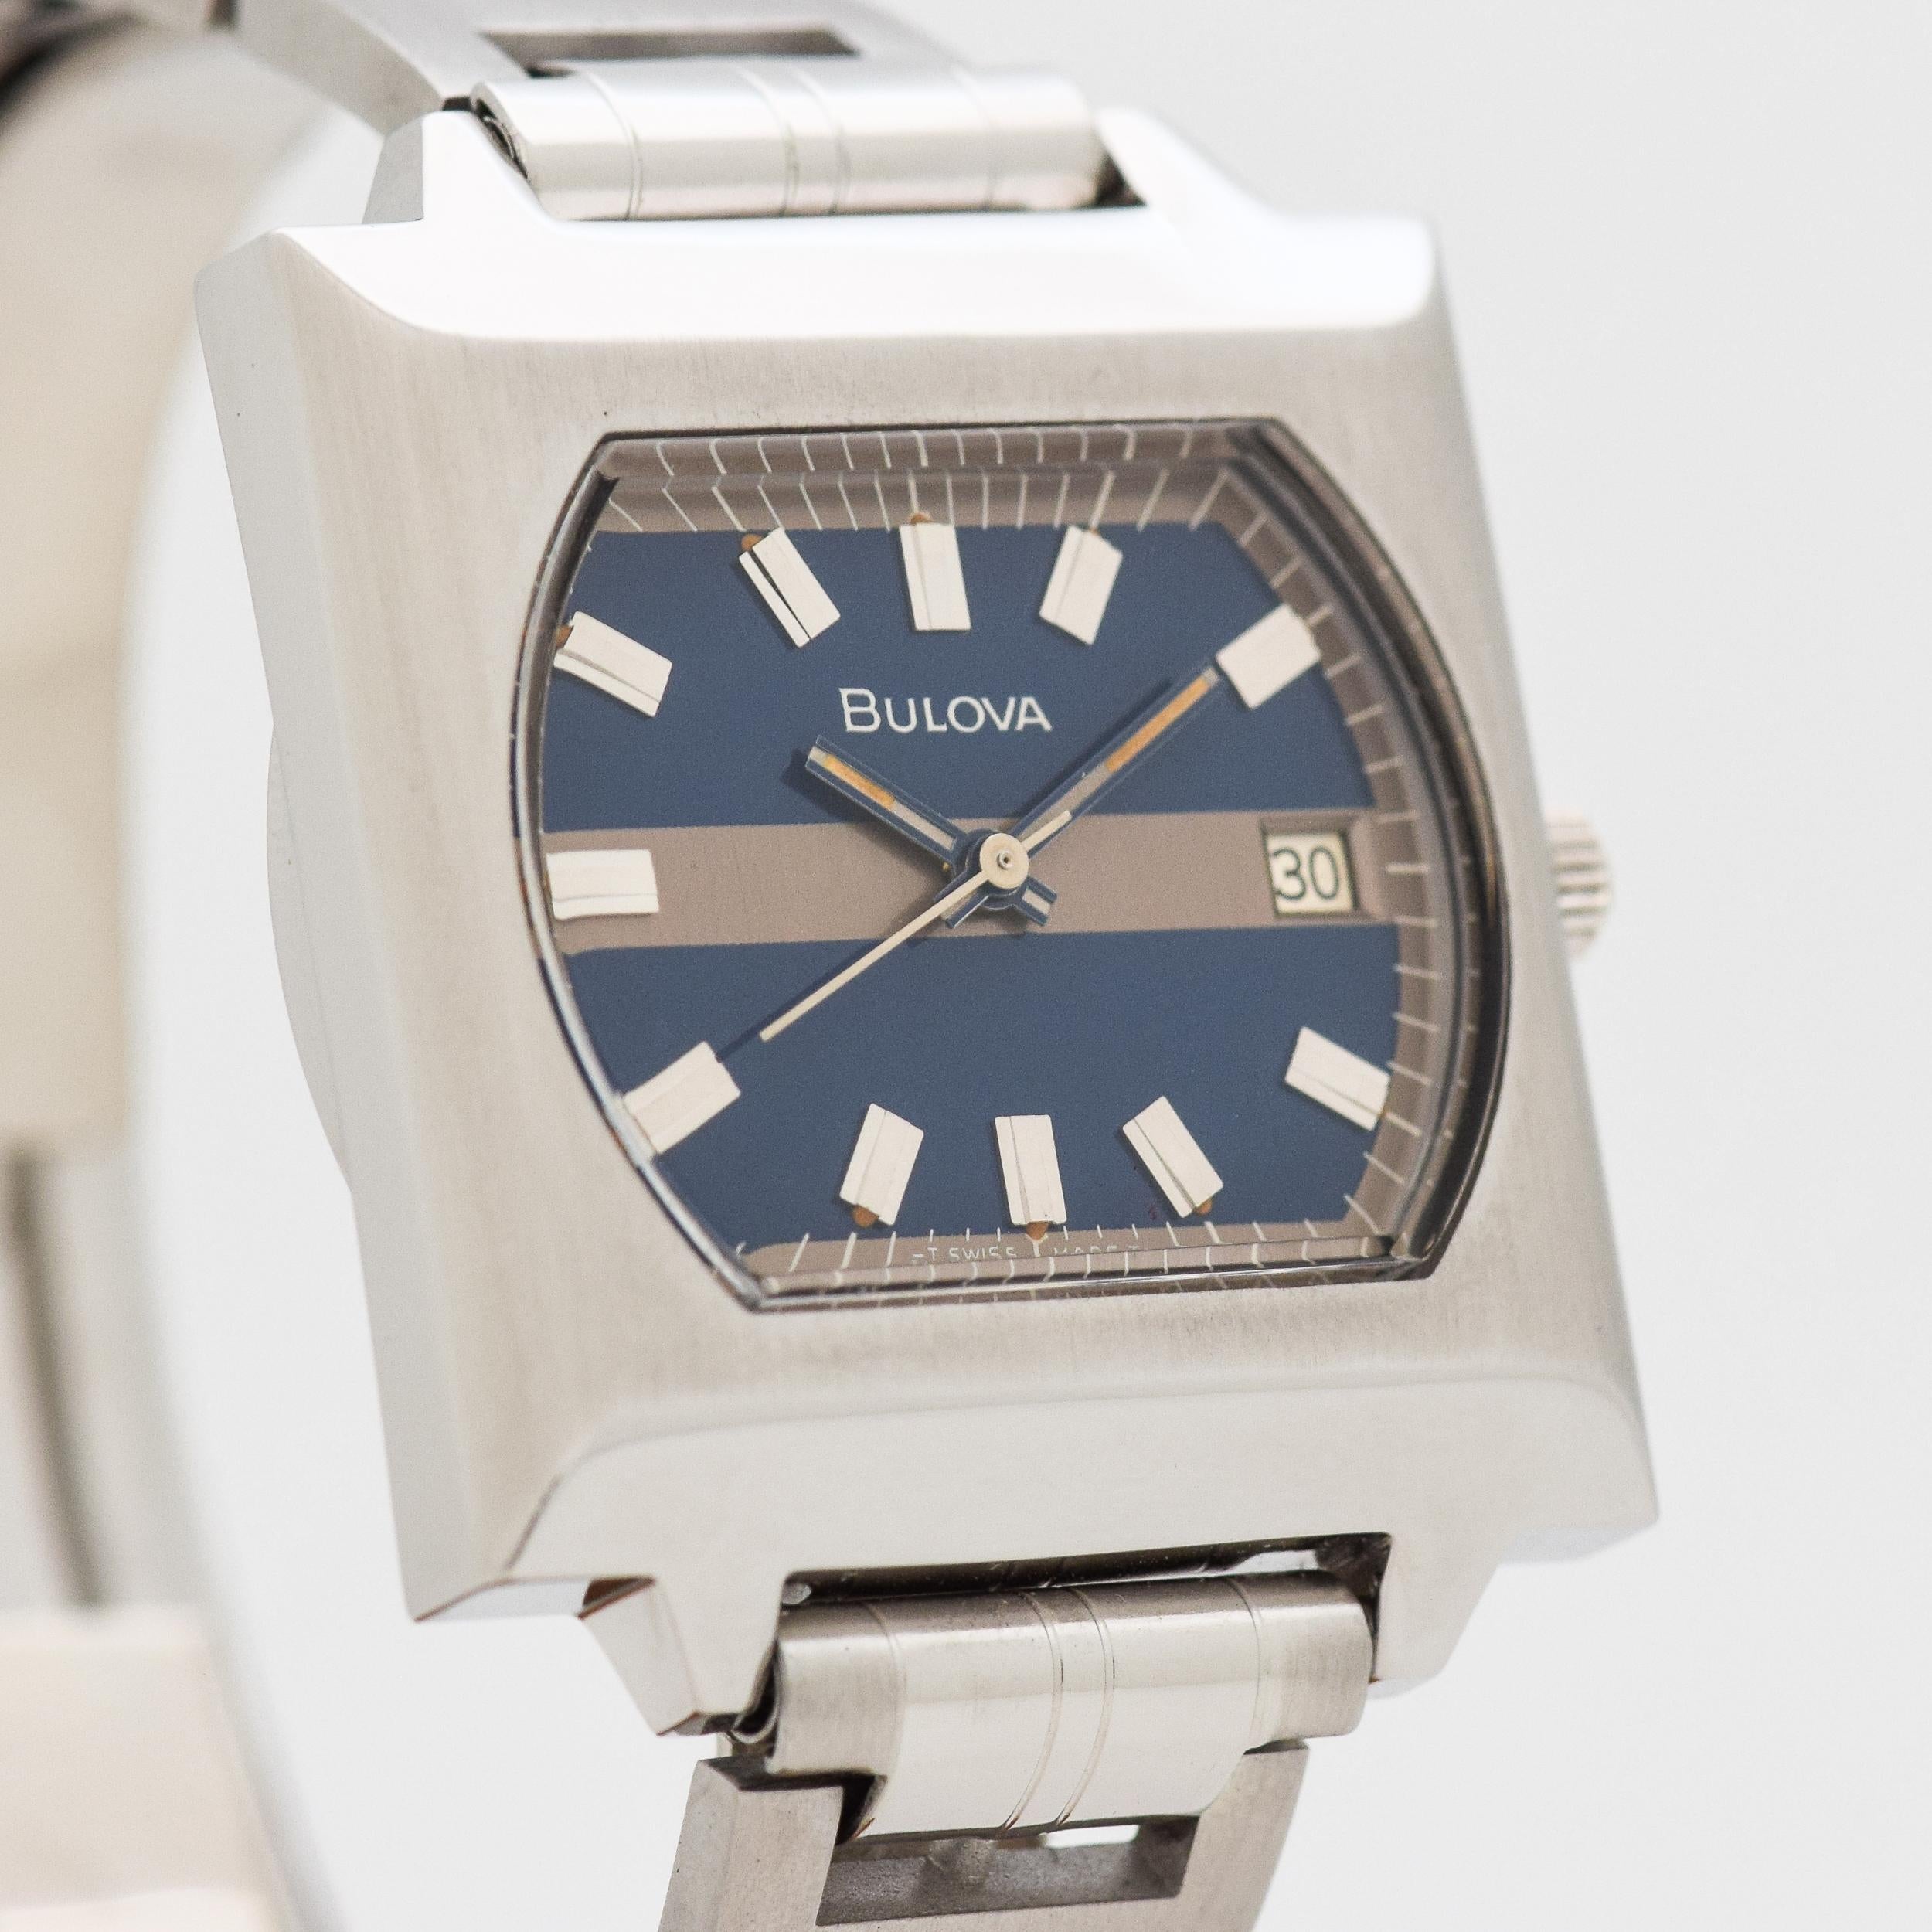 1973 Vintage Bulova T-3263 Stainless Steel watch with Original Blue Dial with Applied Steel Wise Bar/Baton Markers with JB Champion Stainless Steel Bracelet. 35mm x 41mm lug to lug (1.38 in. x 1.61 in.) - 17 jewel, manual caliber movement. Triple